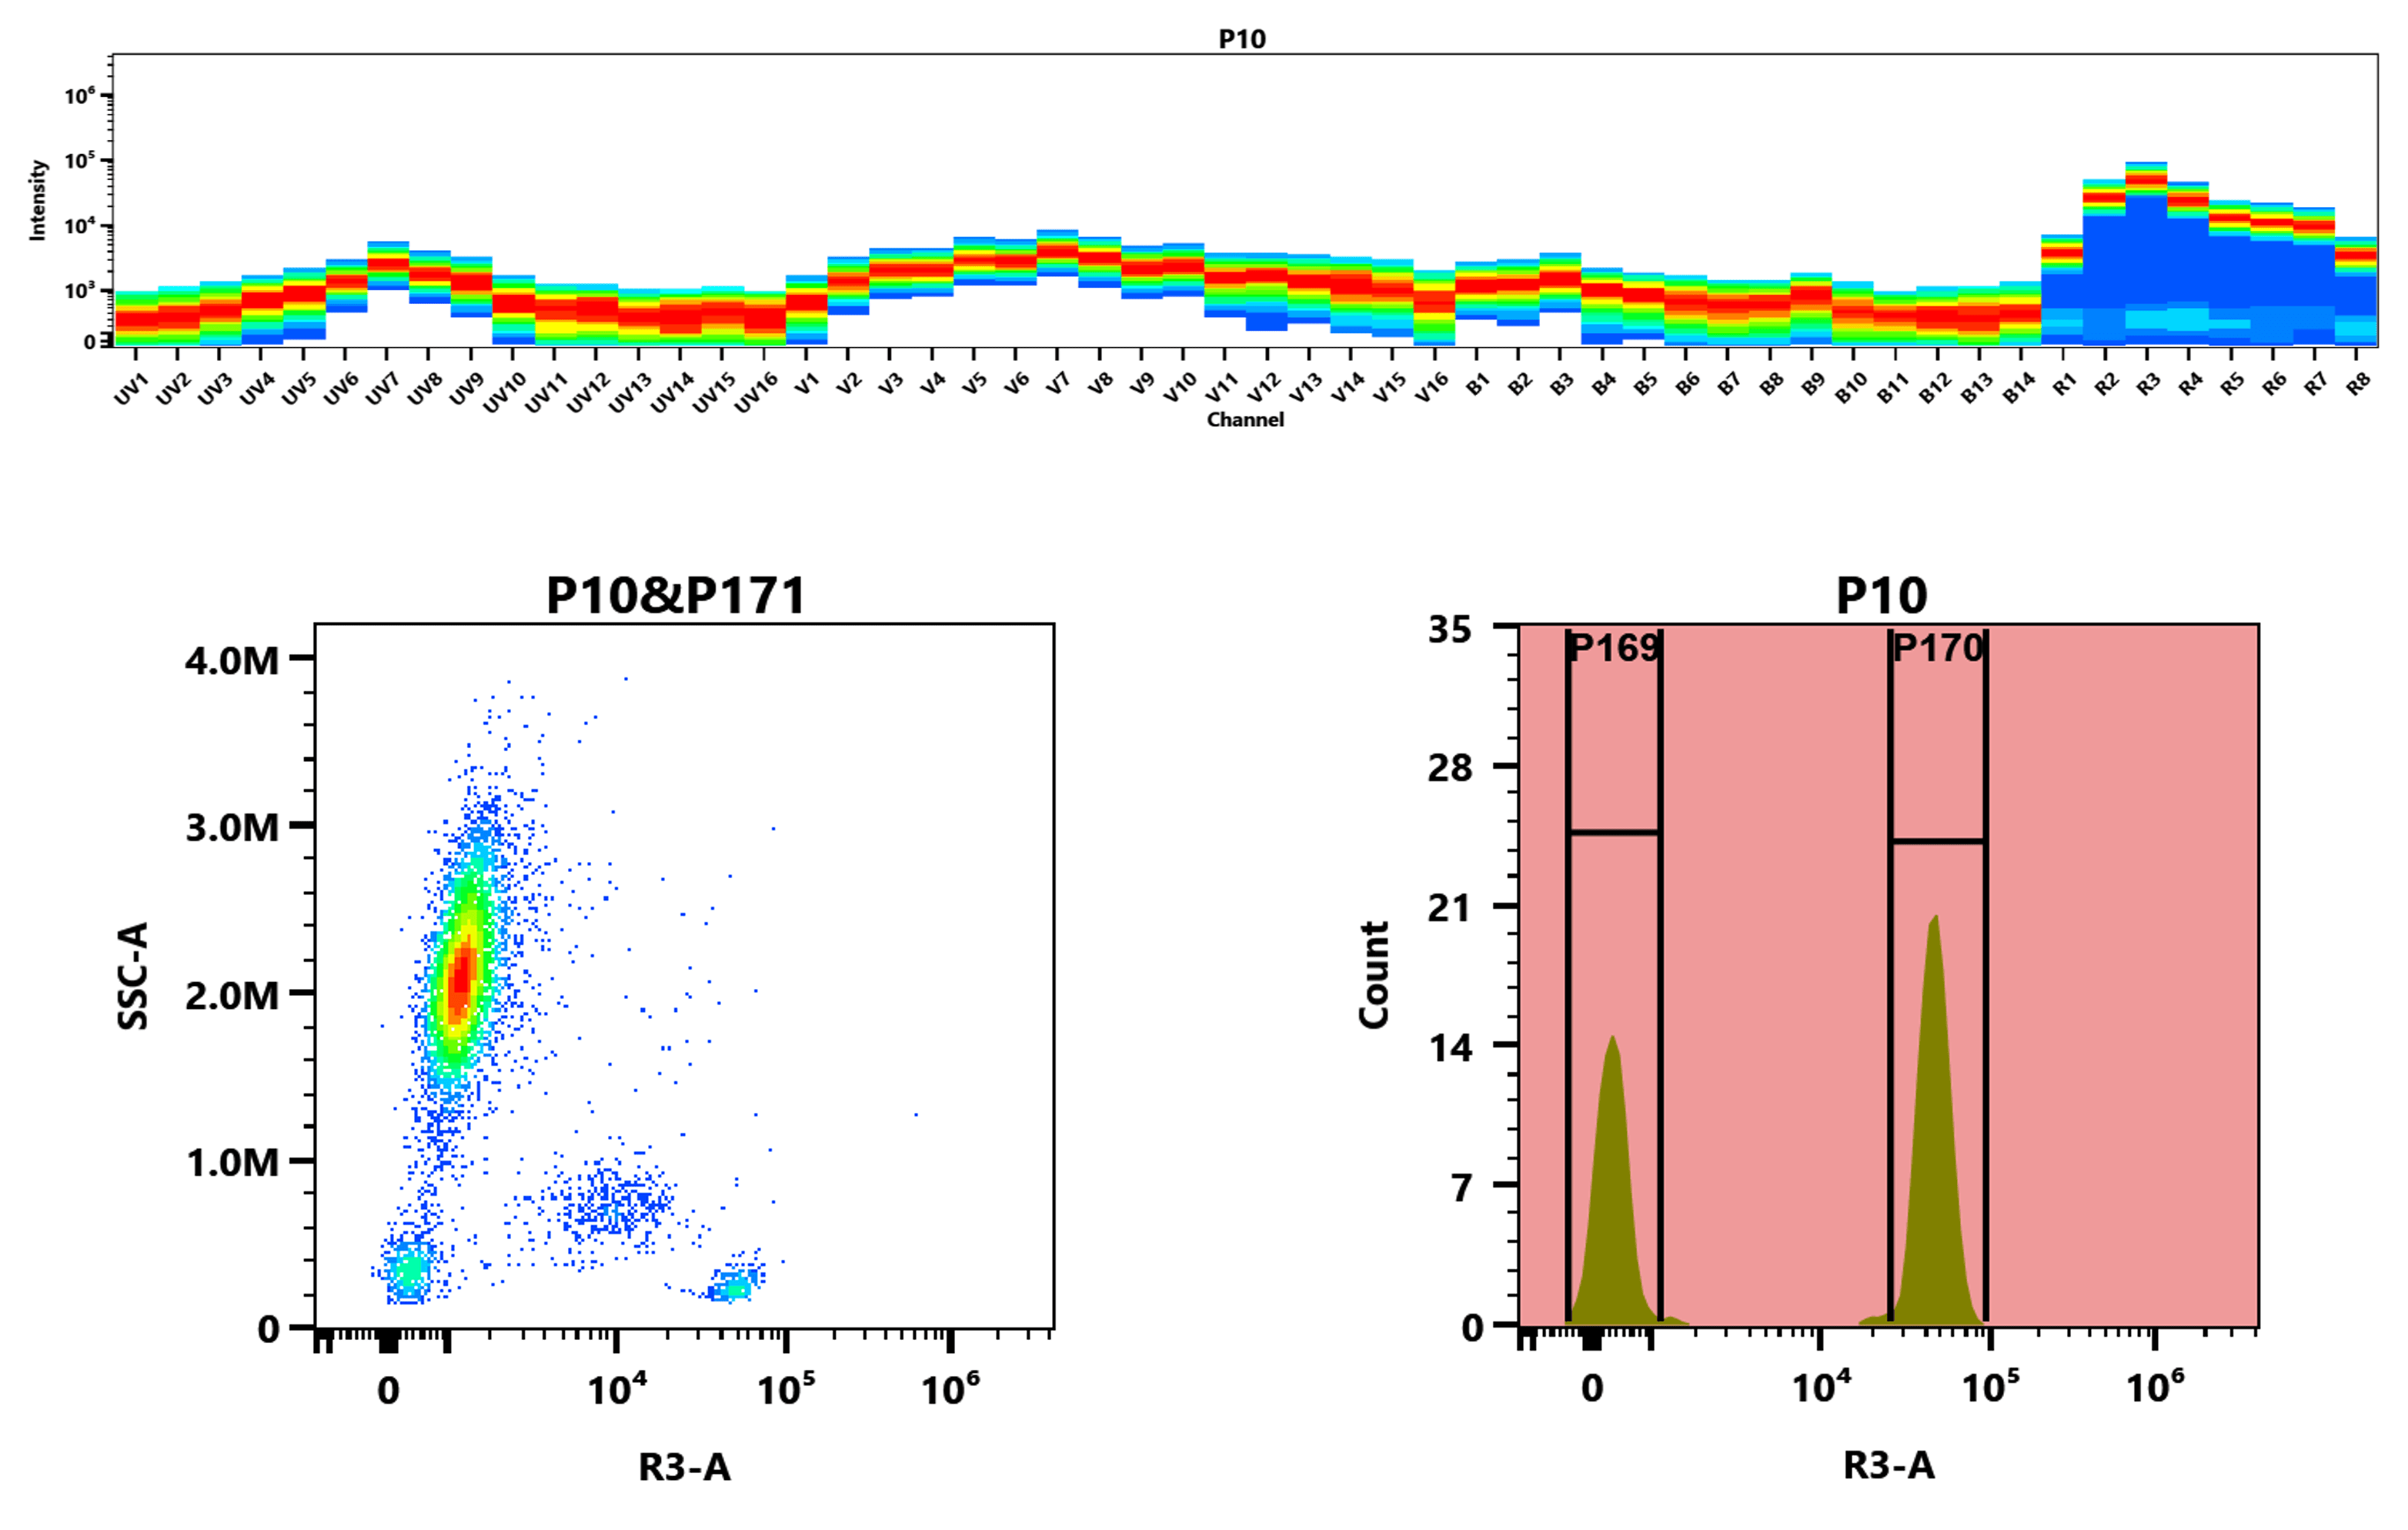 Top) The Spectral pattern was generated using a 4-laser spectral cytometer. Four spatially offset lasers (355 nm, 405 nm, 488 nm, and 640 nm) were used to create four distinct emission profiles, which, when combined, yielded the overall spectral signature. Bottom) Flow cytometry analysis of whole blood stained with iFluor® 670 anti-human CD4 *SK3* conjugate. The fluorescence signal was monitored using an Aurora spectral flow cytometer in the iFluor® 670 R3-A channel.